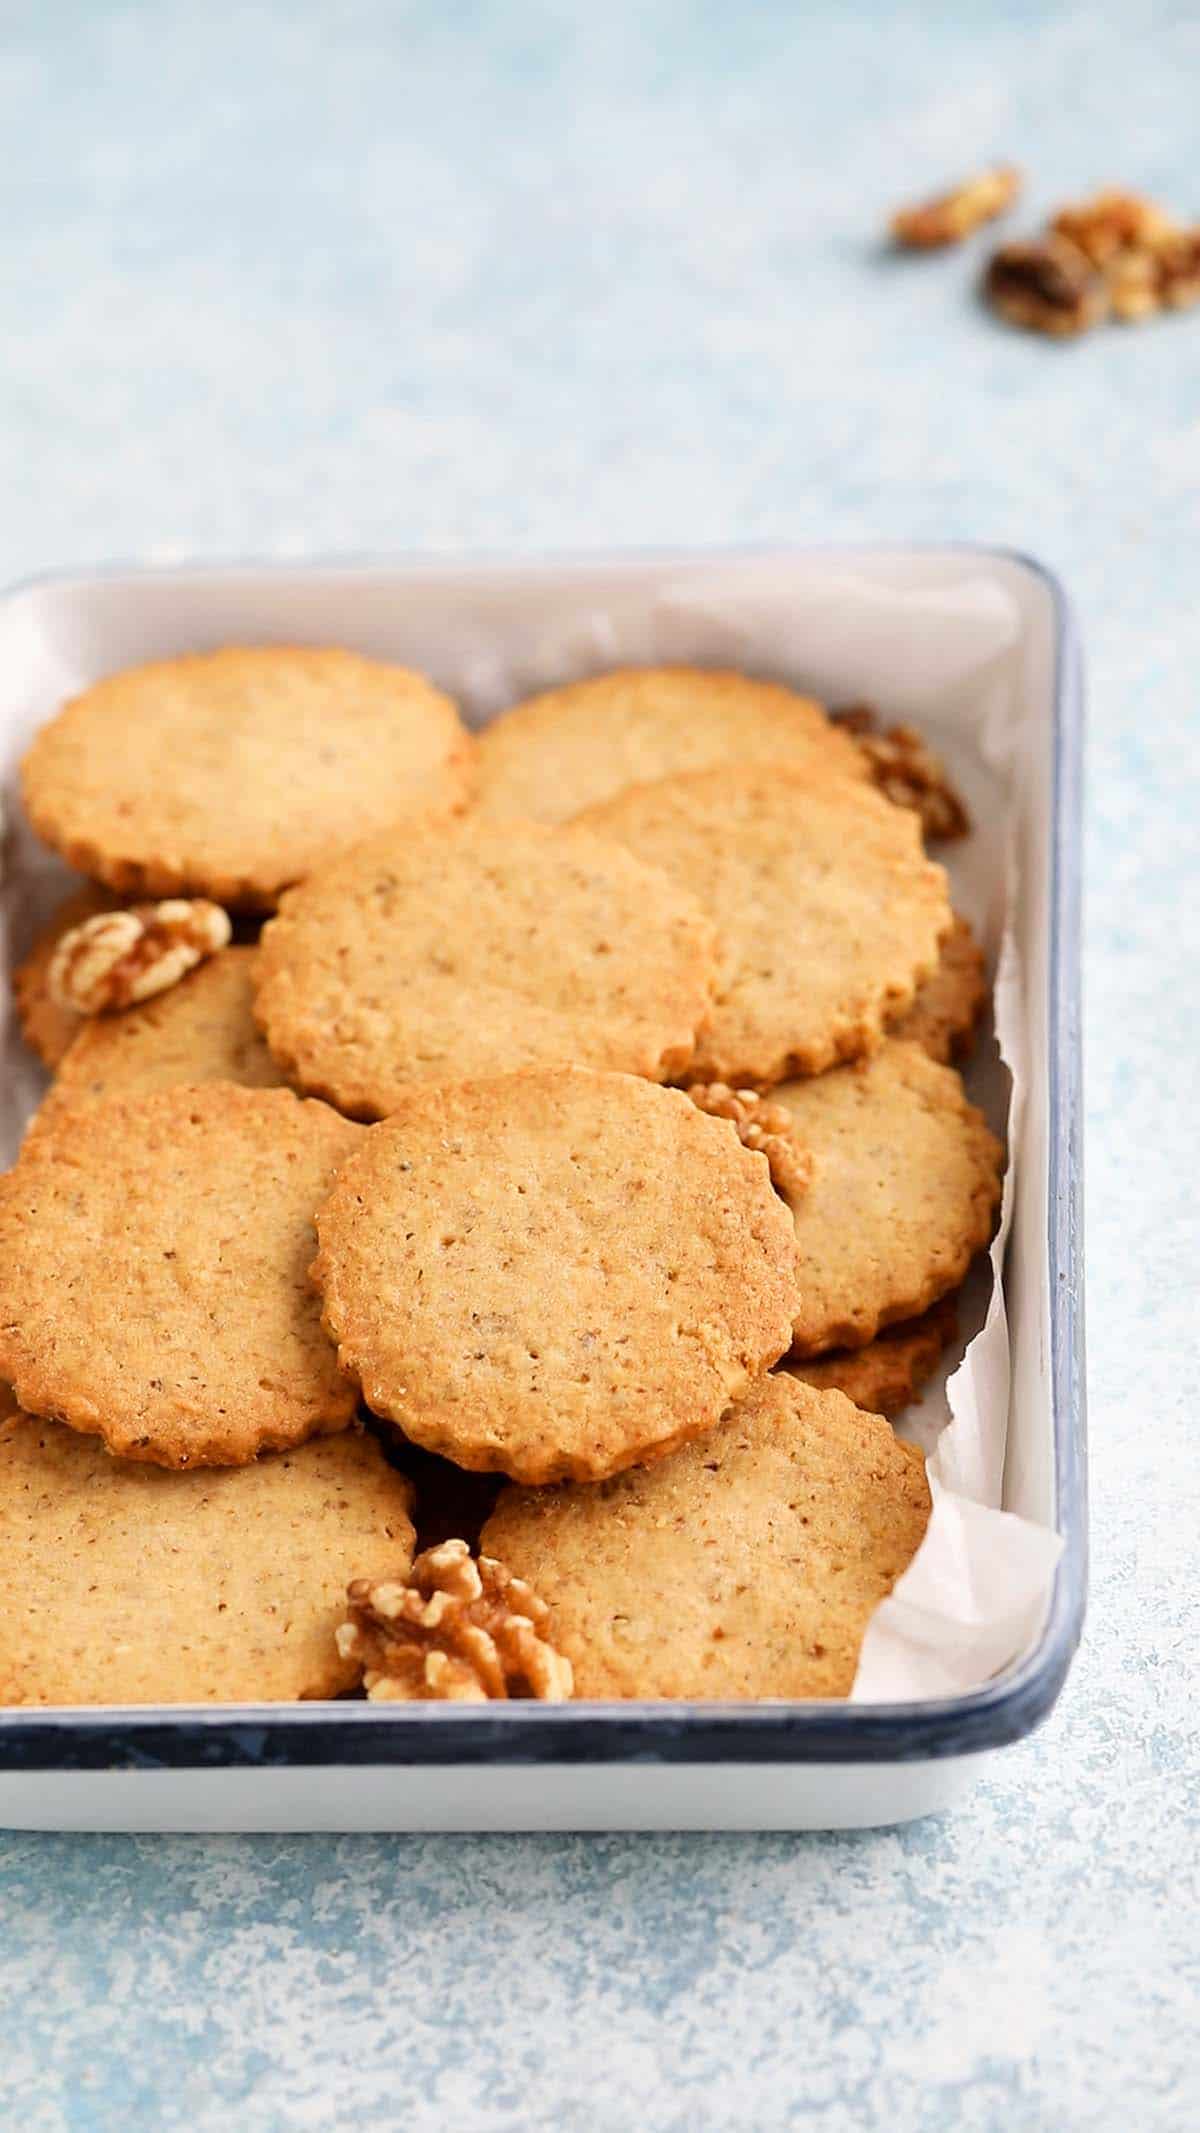 round shaped walnut cookies placed on a white rectangular tray.